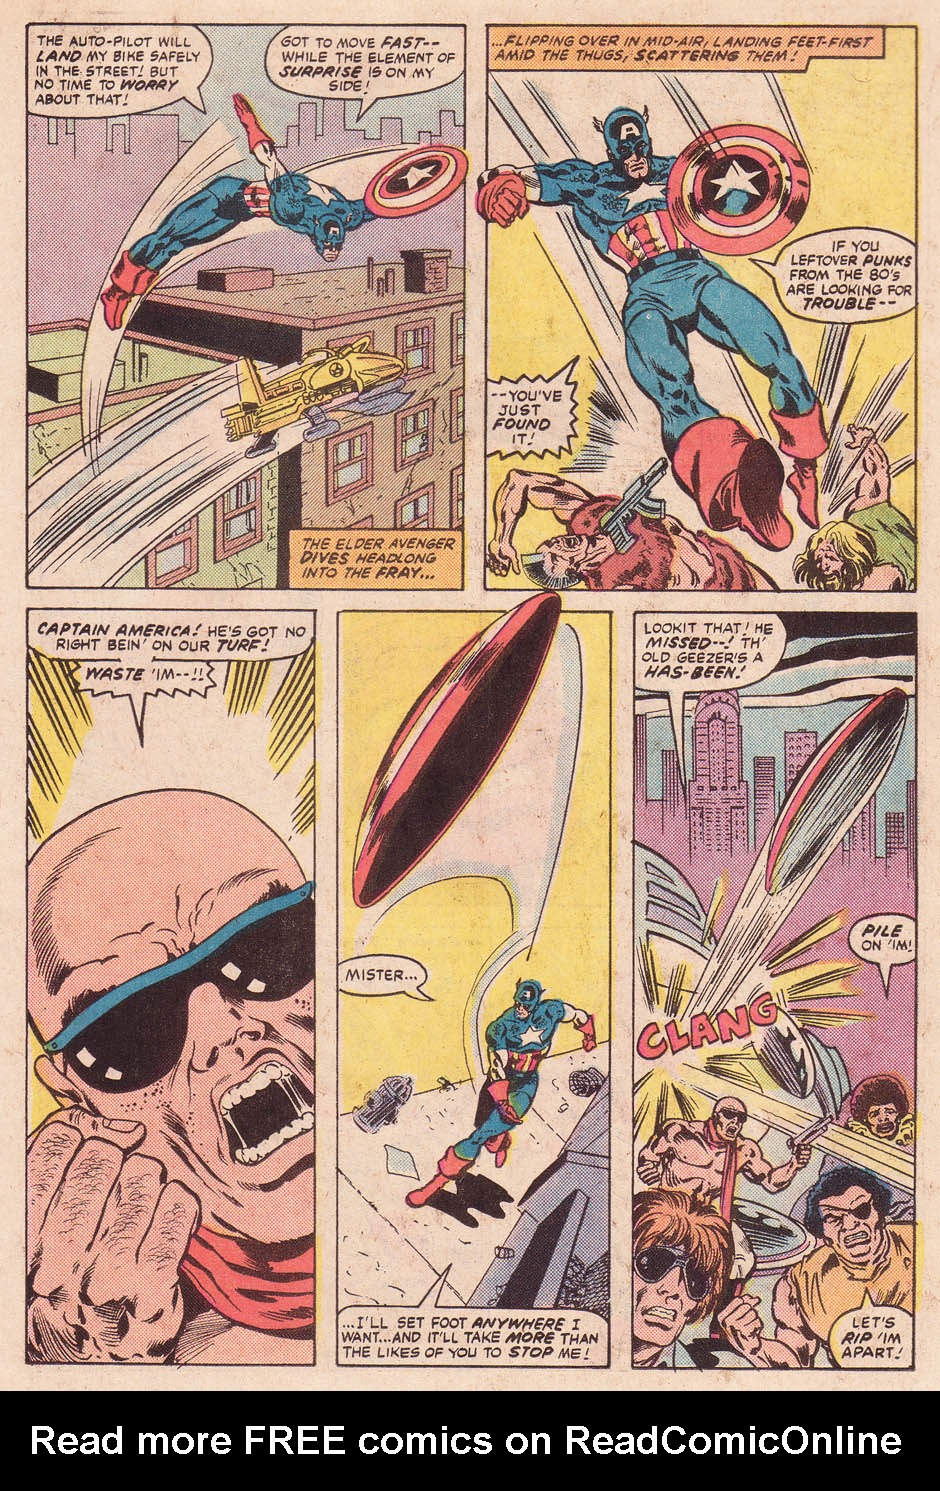 What If? (1977) issue 38 - Daredevil and Captain America - Page 19